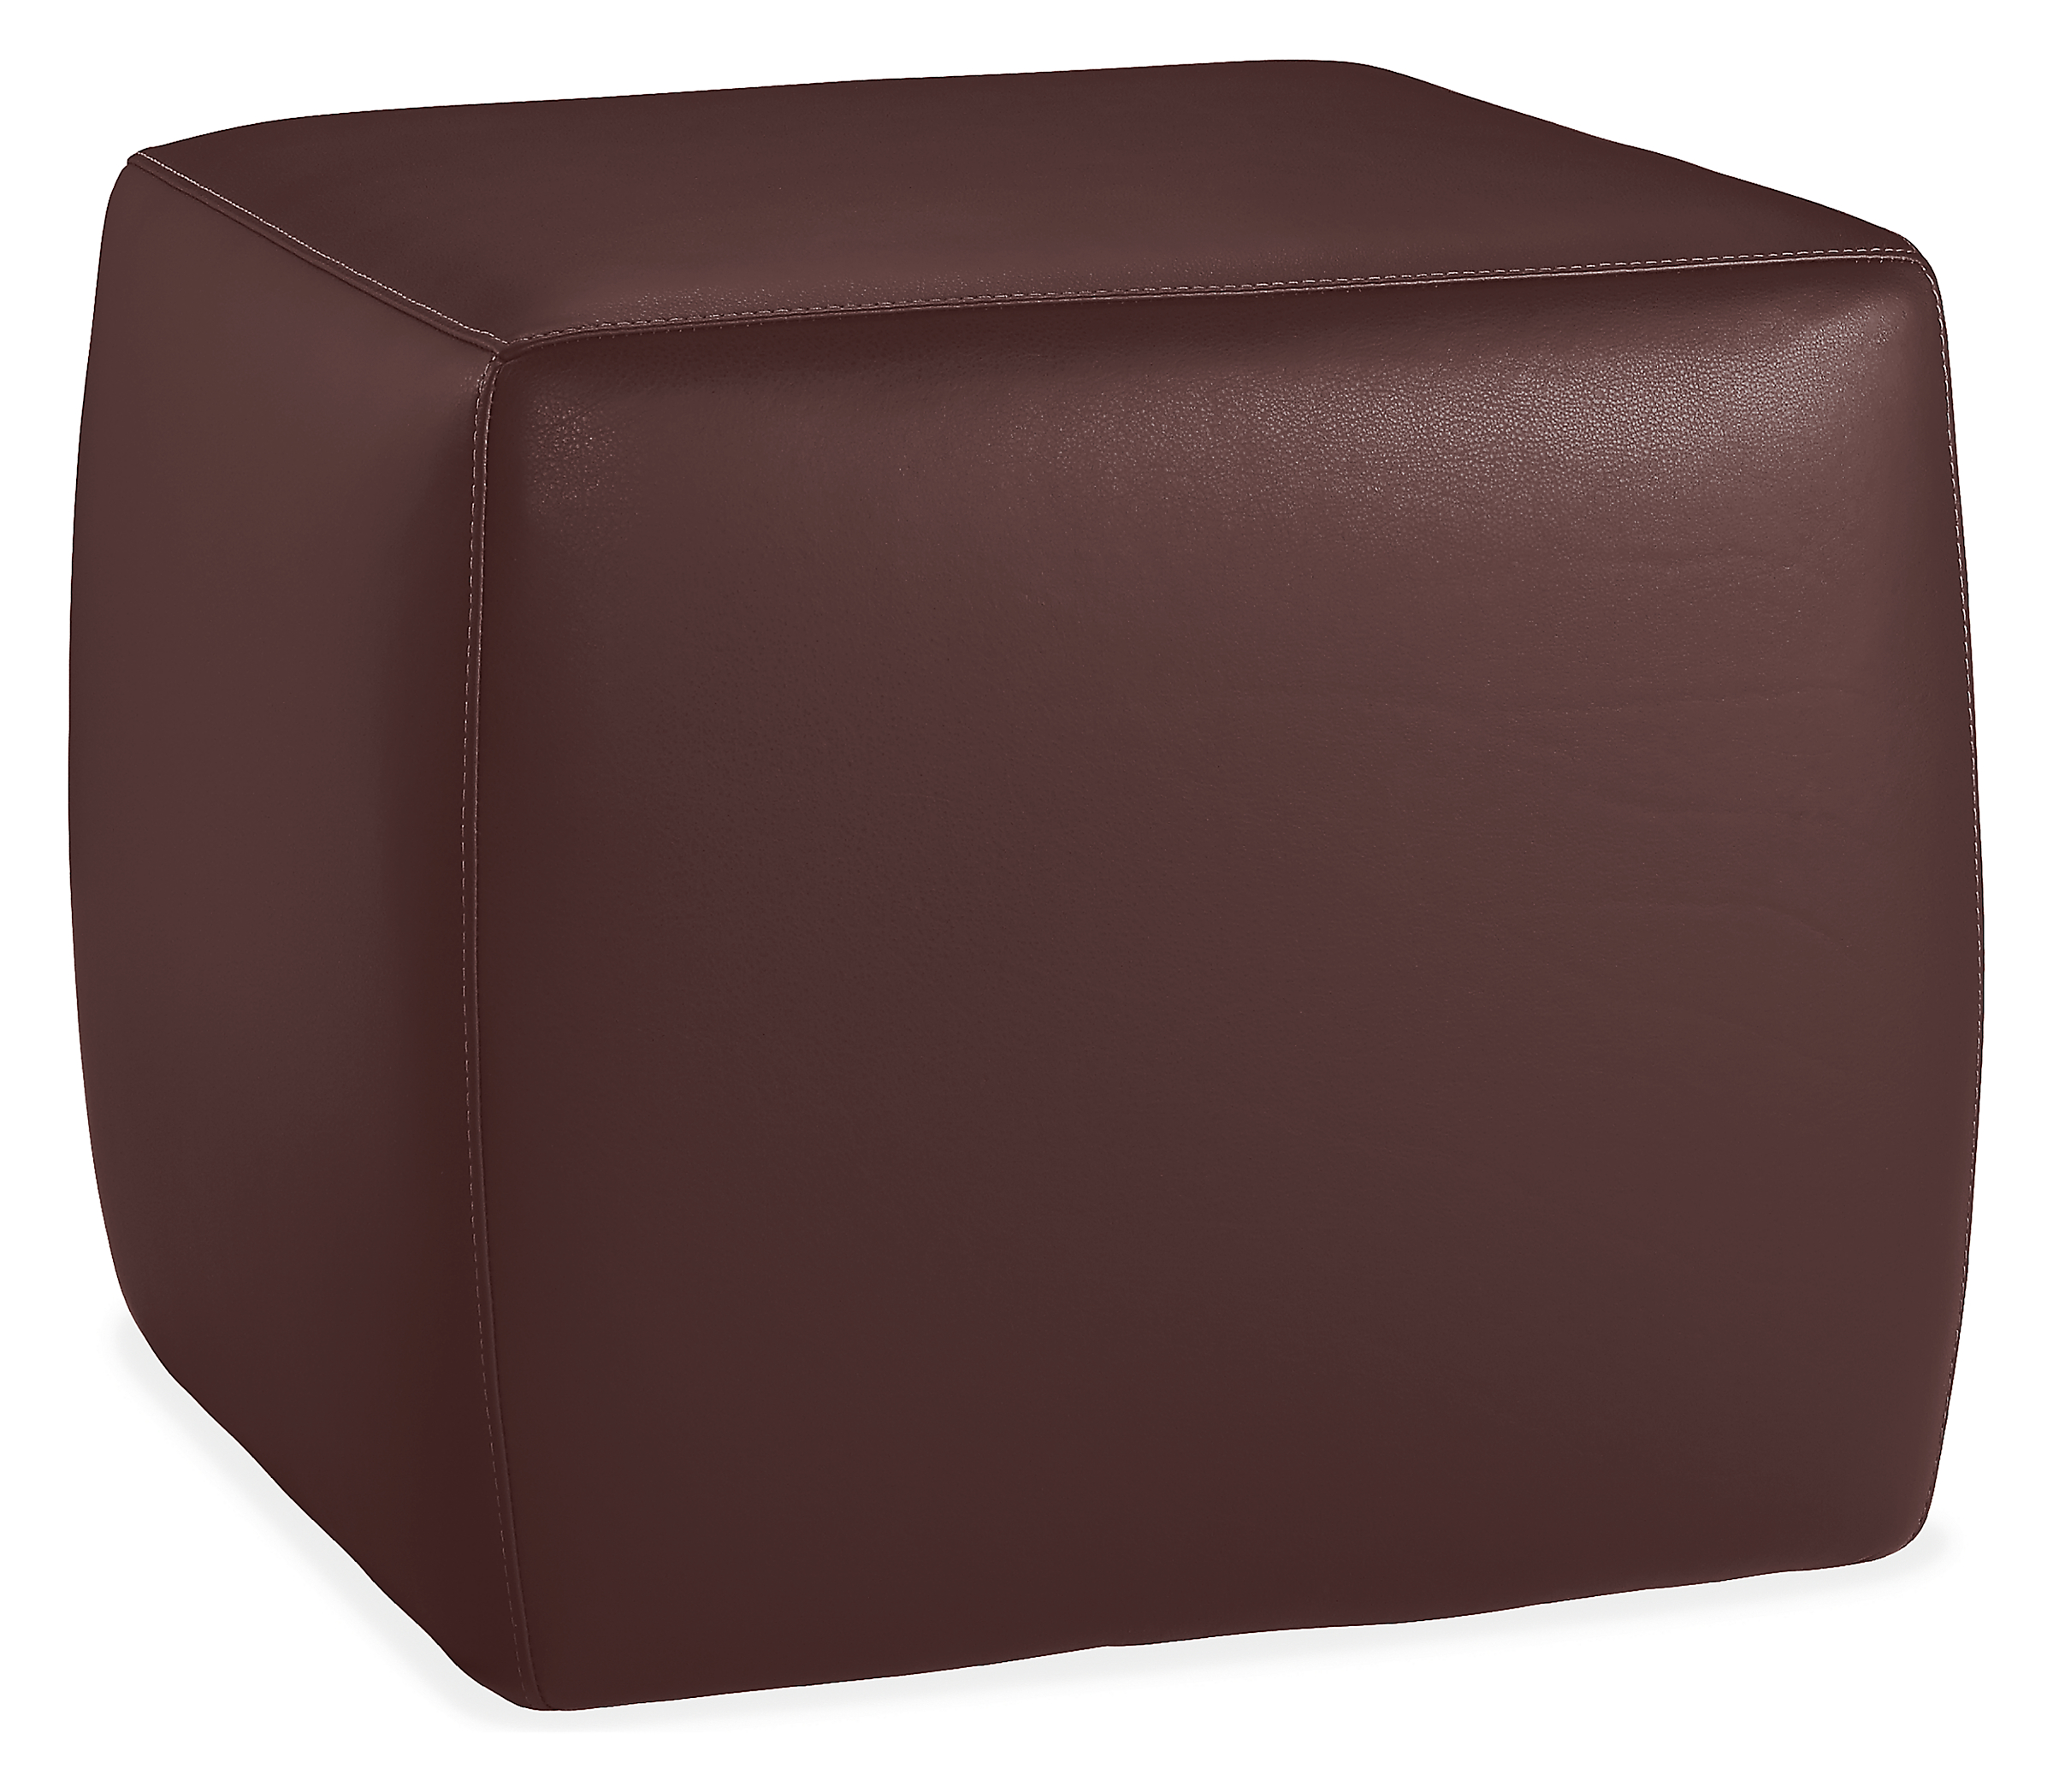 Lind 21w 21d 18h Square Ottoman in Lecco Bourbon Leather